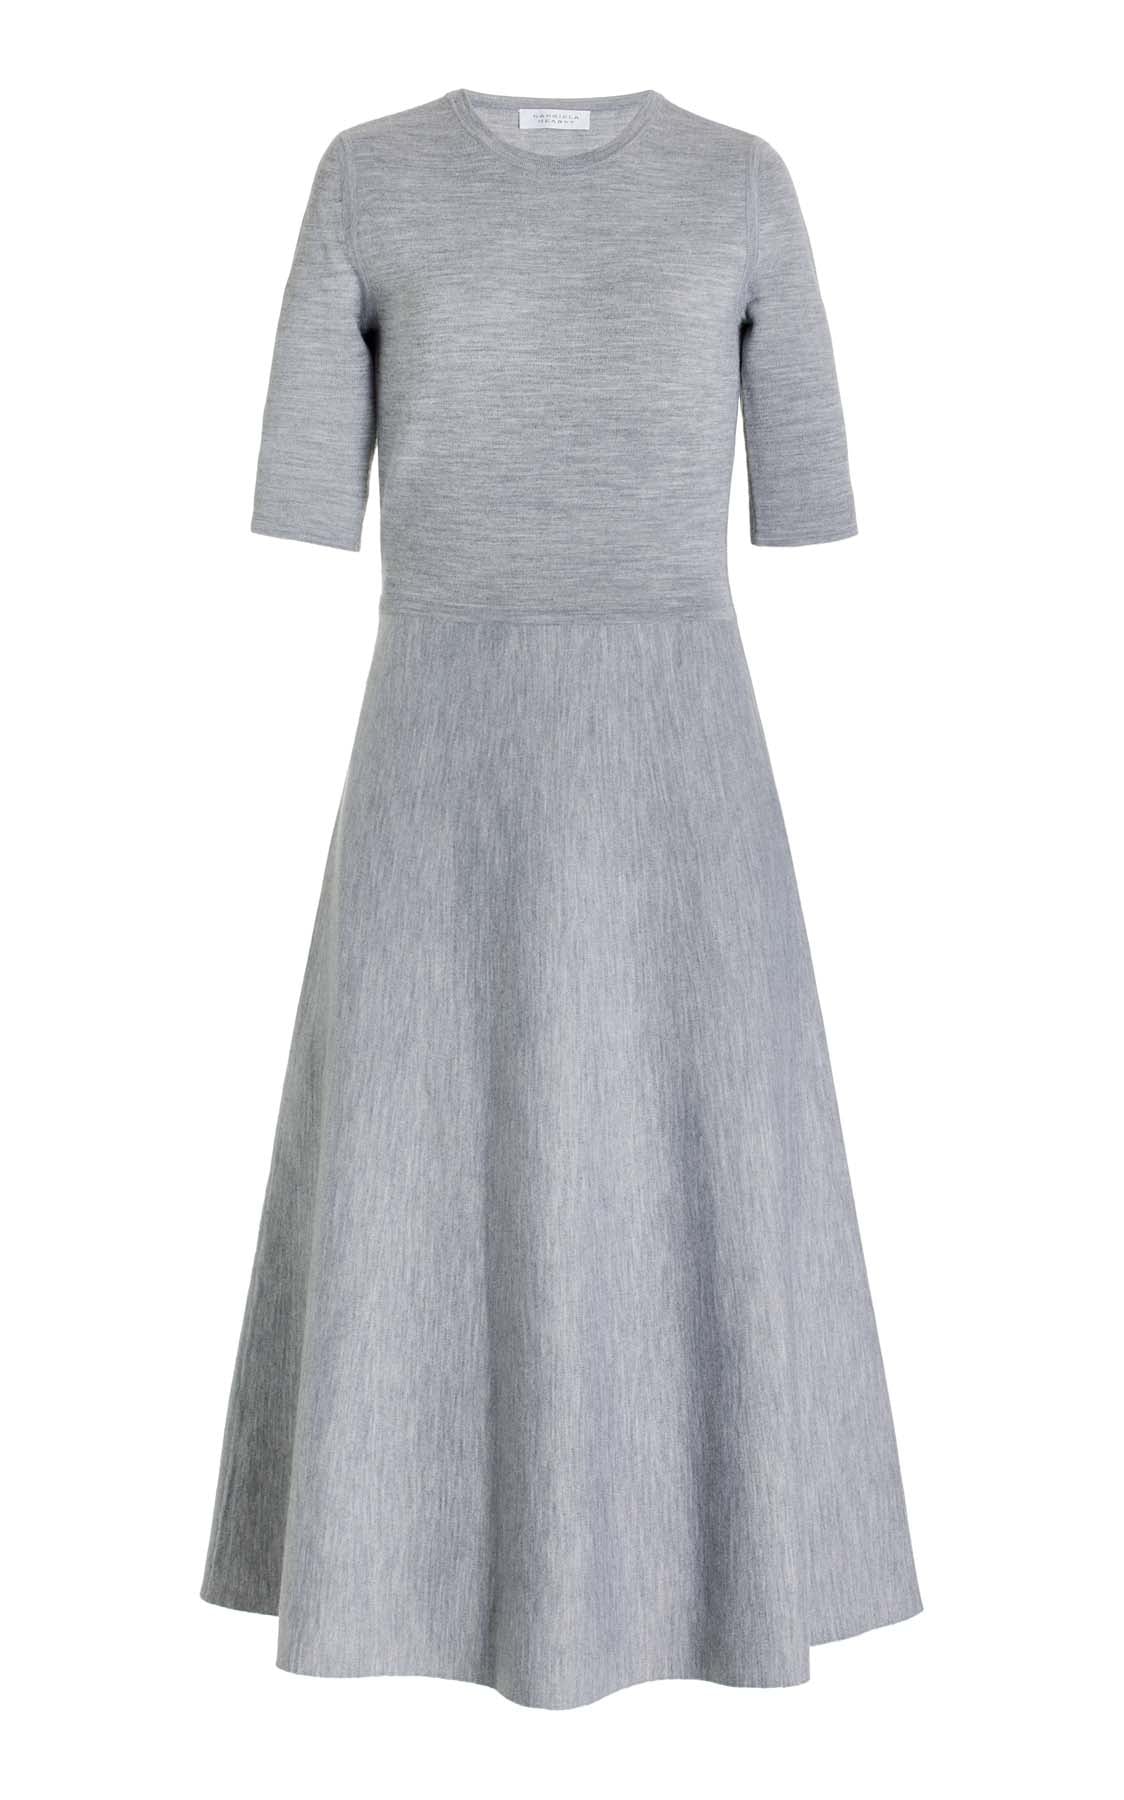 Seymore Knit Dress in Grey Cashmere Wool with Silk